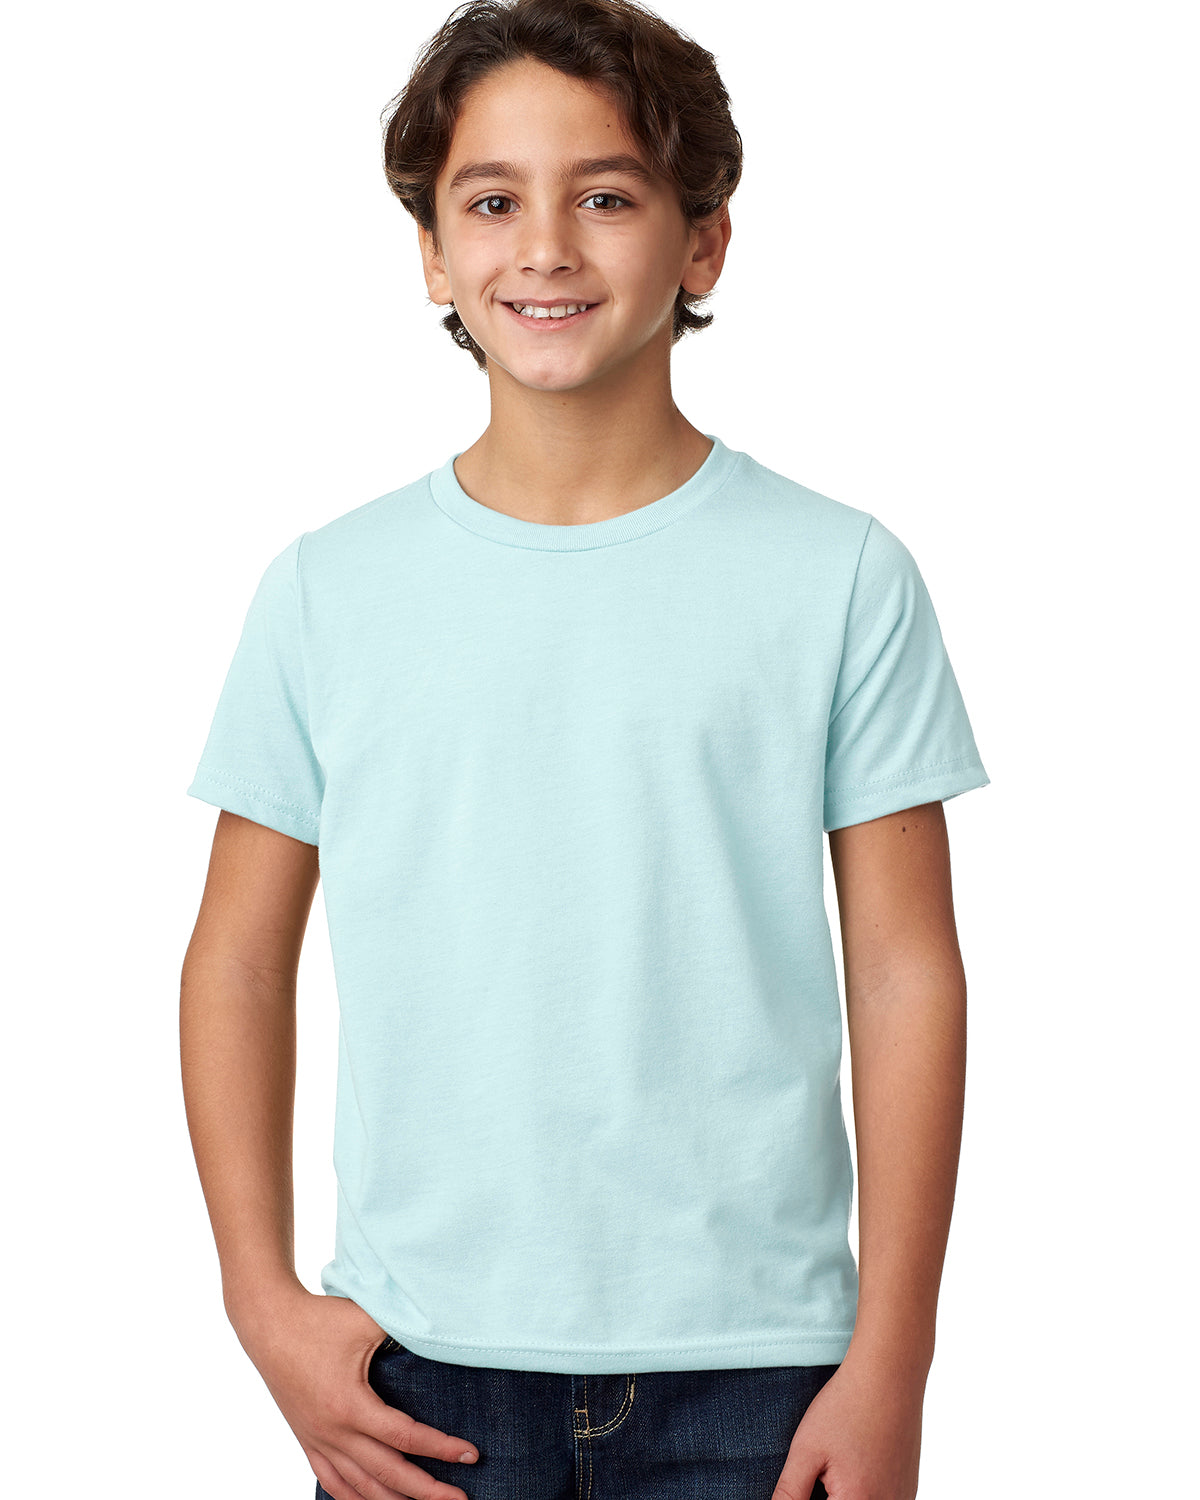 child model wearing next level youth CVC tee in ice blue